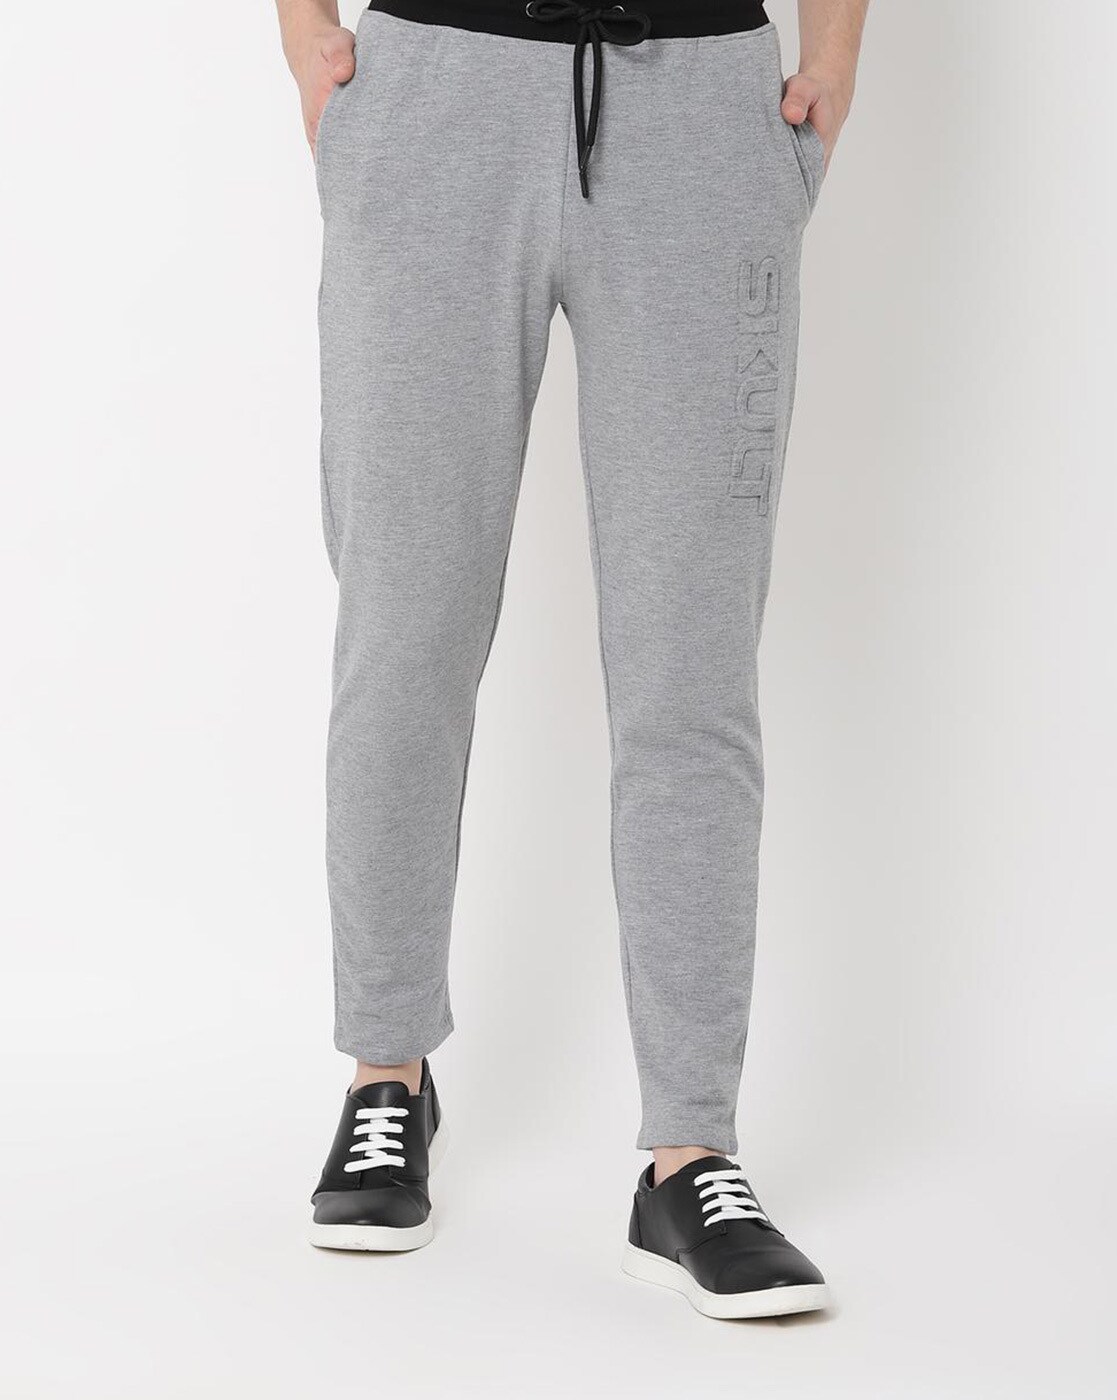 Buy SKULT by Shahid Kapoor Men Charcoal Grey Solid Sports Track Pants - Track  Pants for Men 10236283 | Myntra